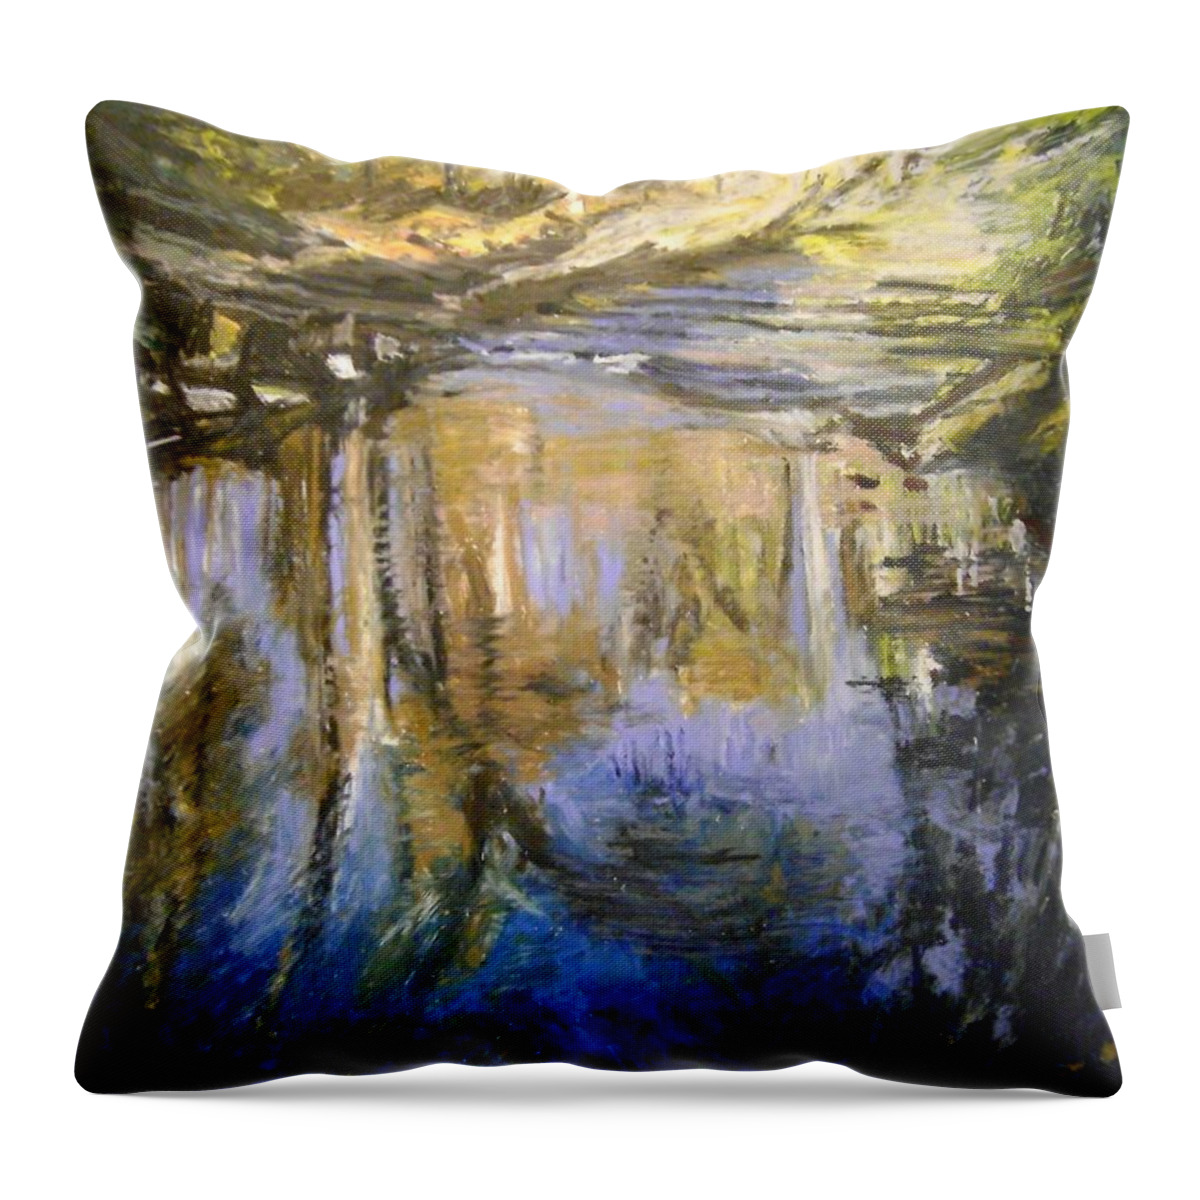 Puffers Pond Throw Pillow featuring the pastel Puffers Pond by Therese Legere